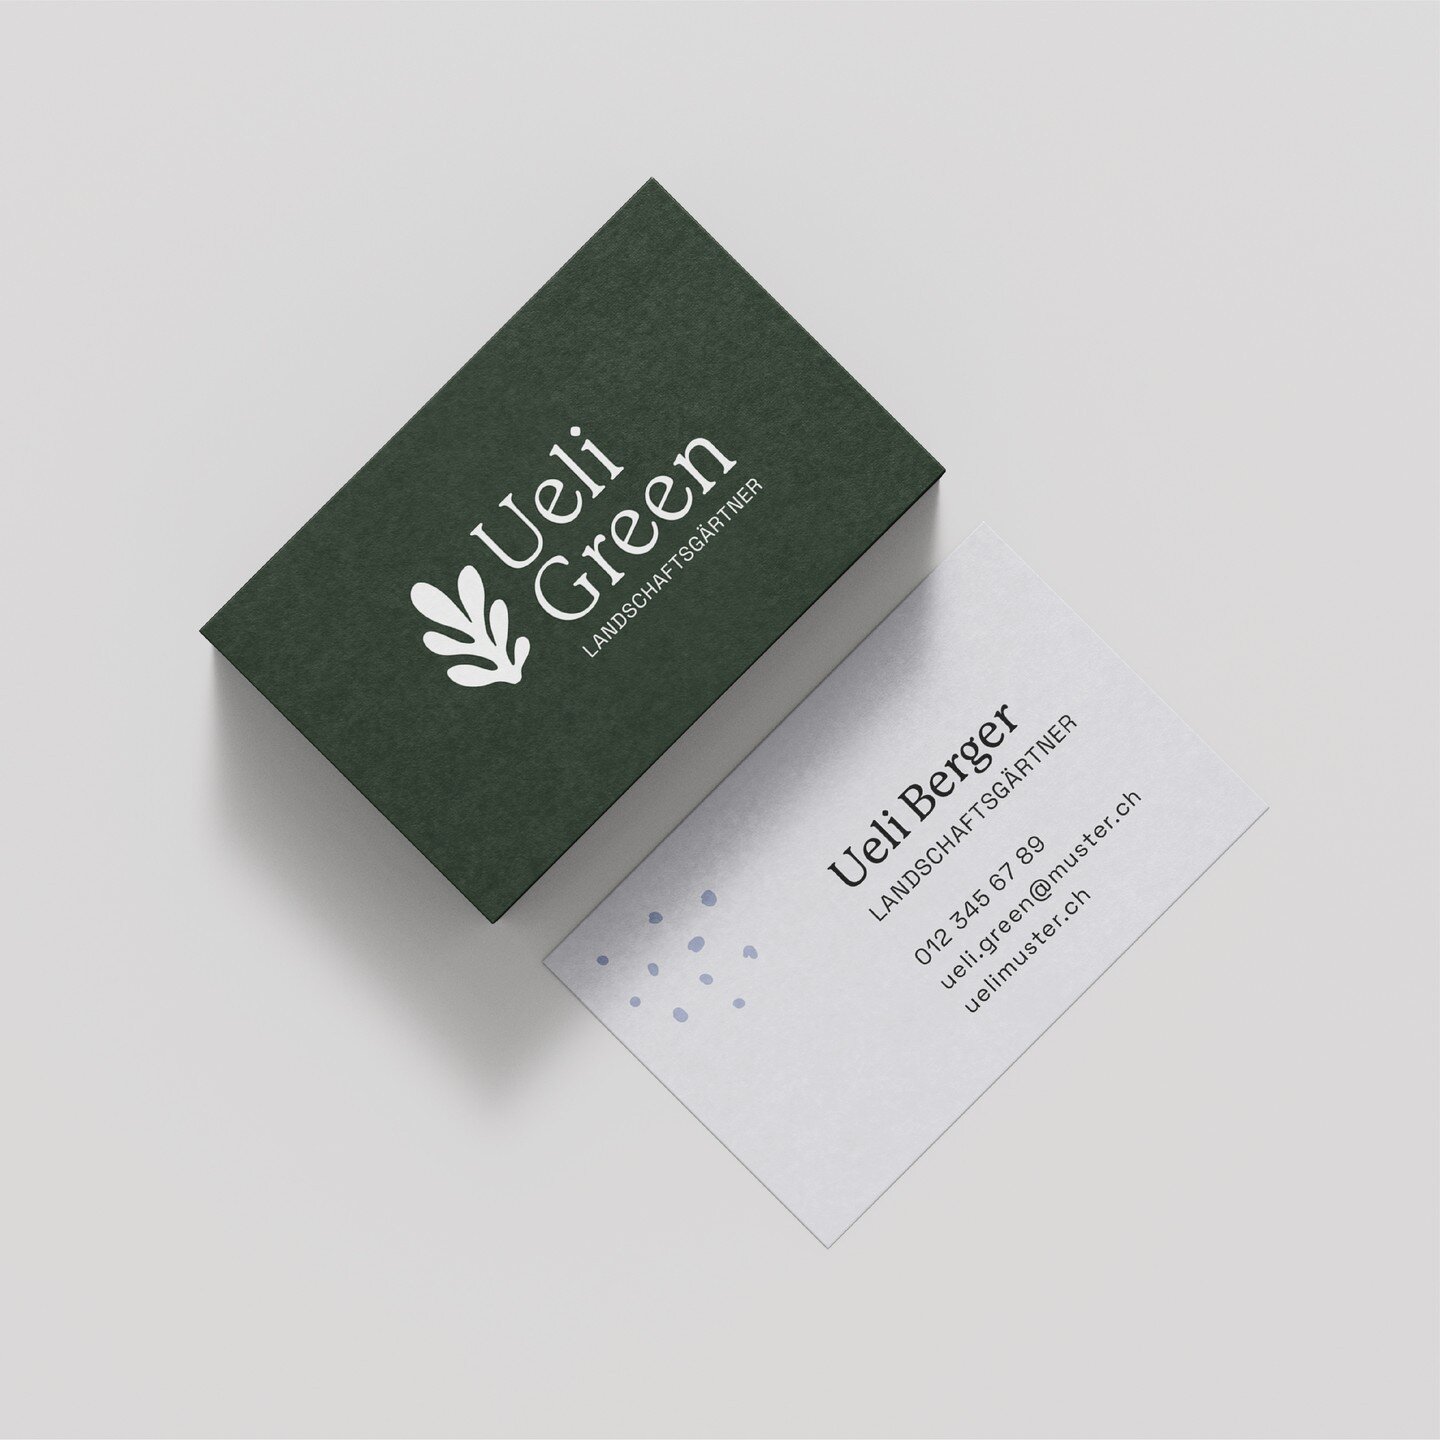 Mini brand identity for a local landscaper whose heart is to create an oasis for his costumers where they can really enjoy the beauty of nature. Playful illustrations and a calming color palette reflect his approach and help the brand stand out from 